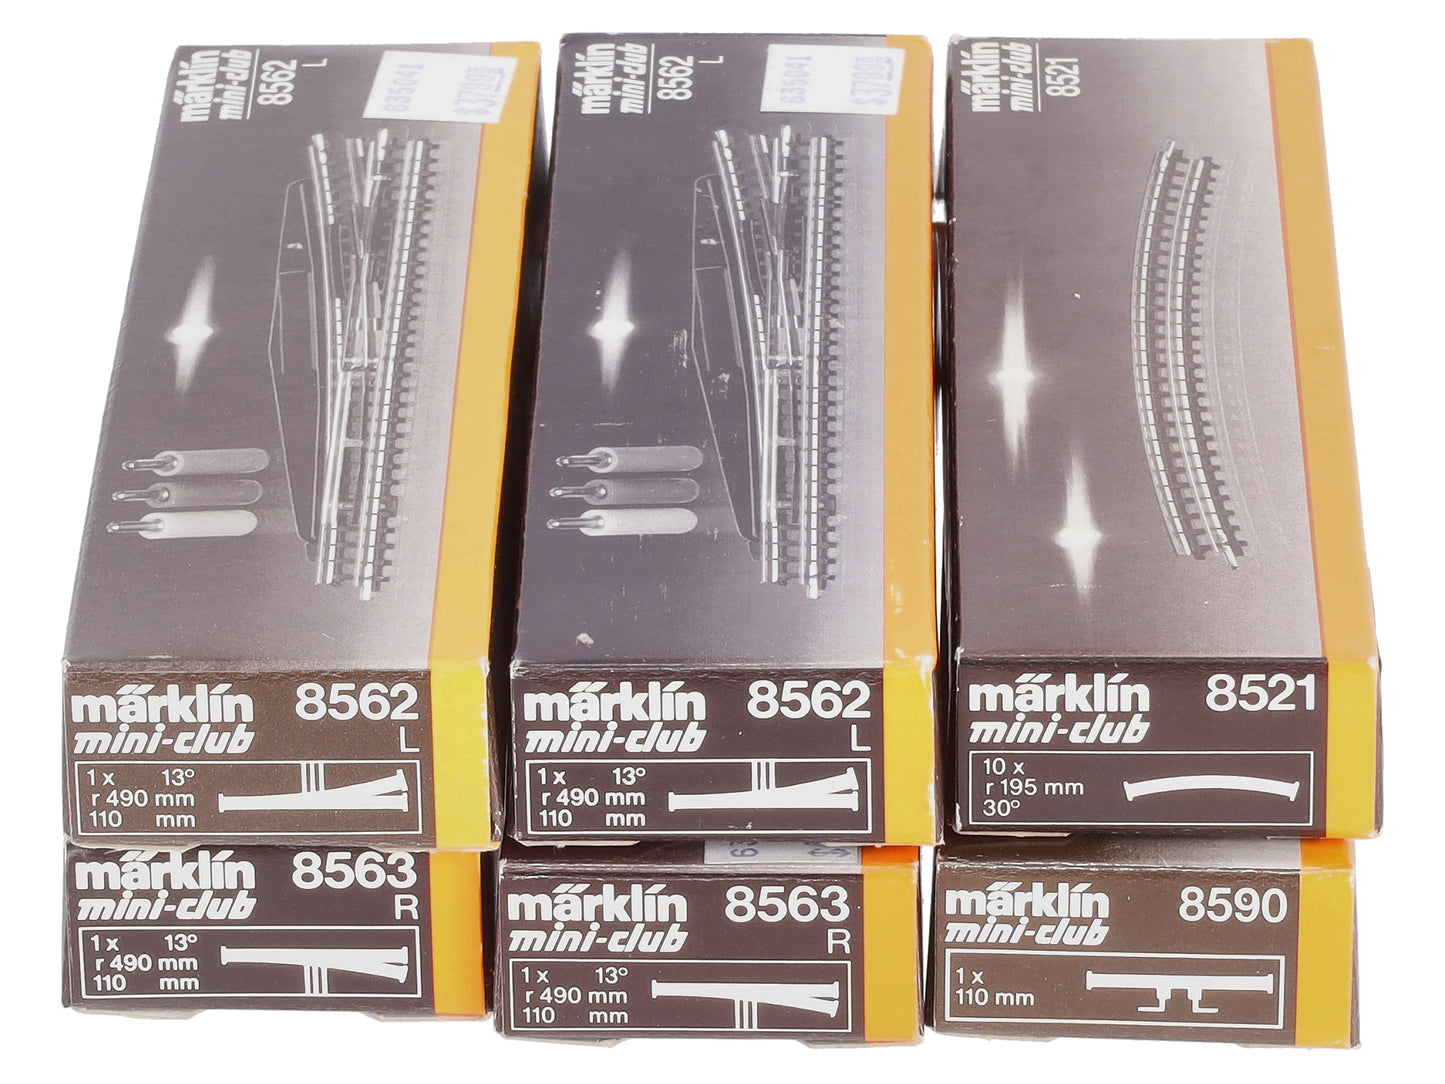 Marklin Z Scale Assorted Track Sections: 8562, 8563, 8590, 8521 [15] EX/Box